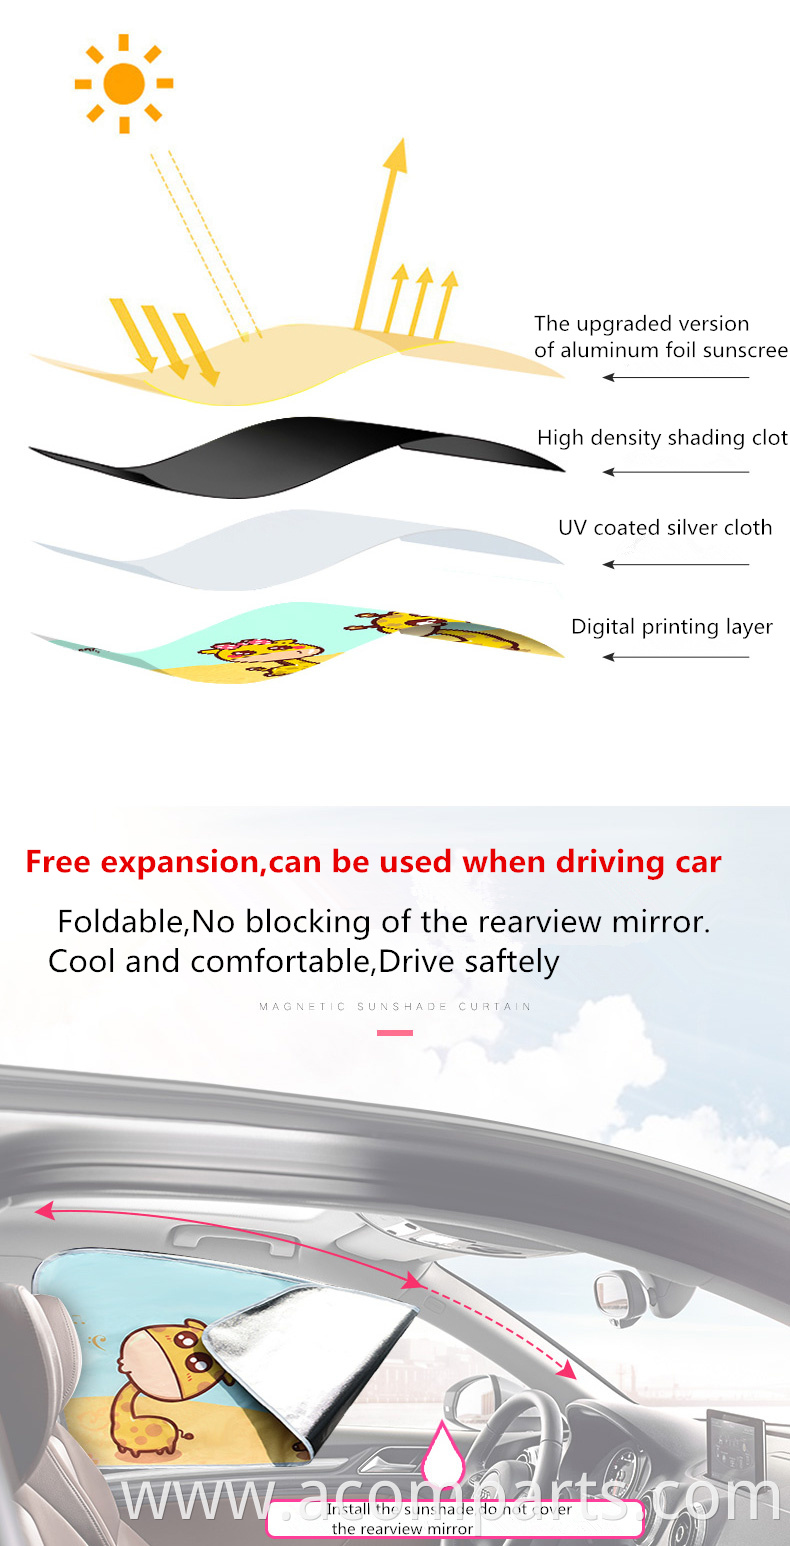 Summer hot weather UV foils cooling foldable magnet static cling compact car sunshade